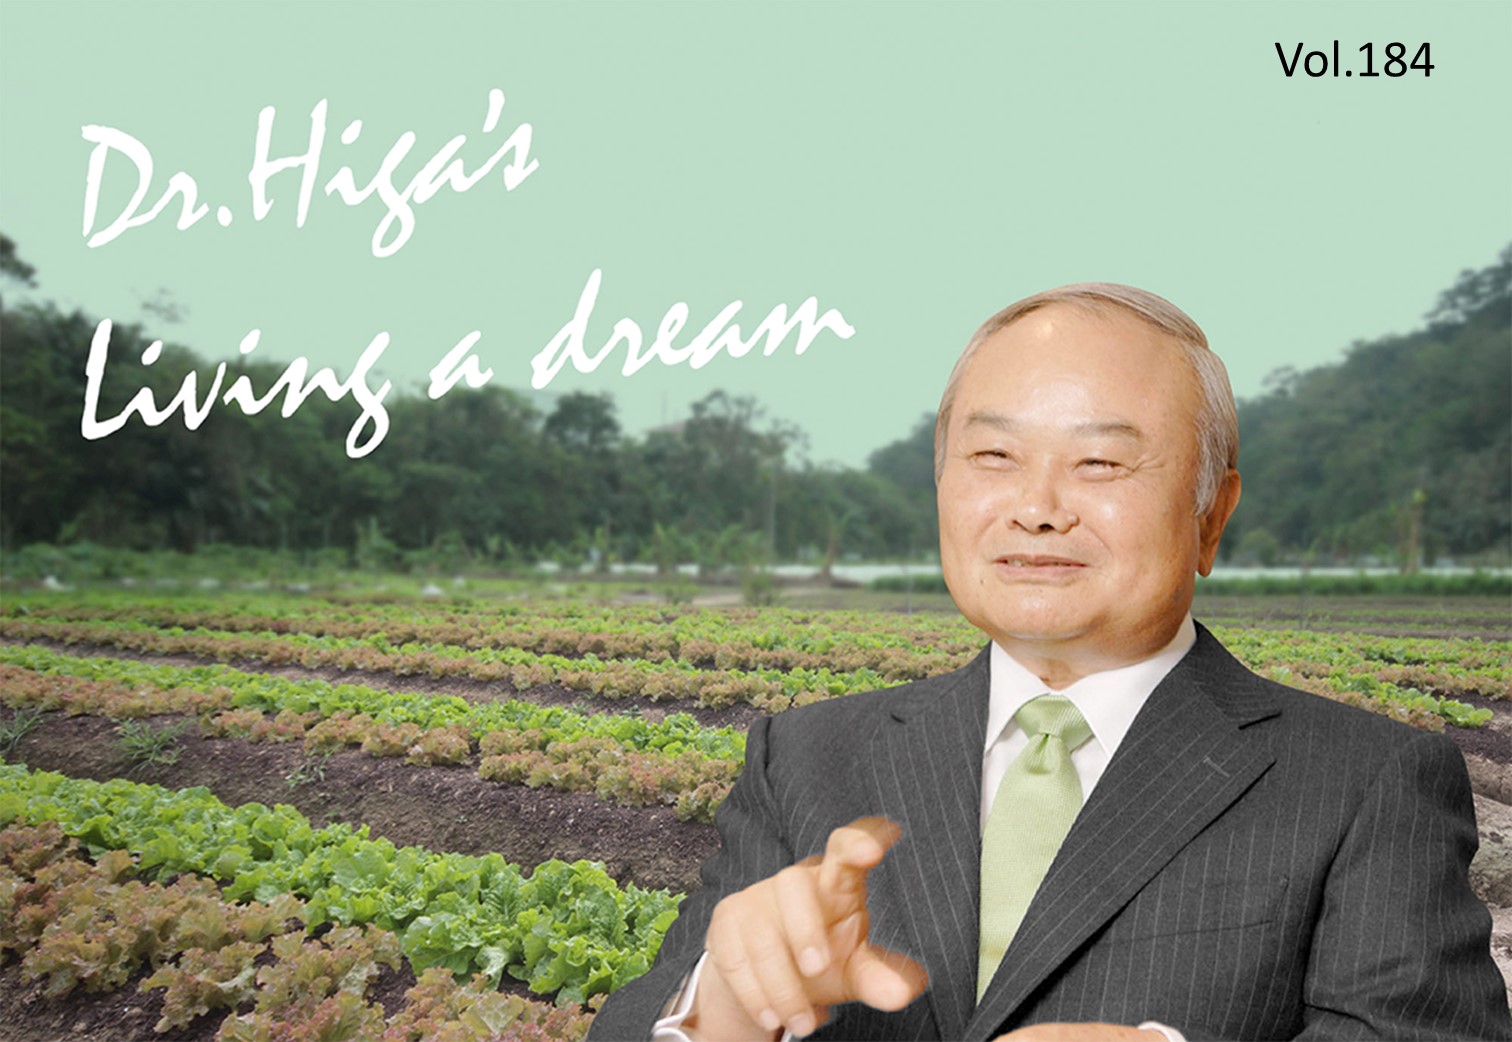 Dr. Higa's "Living a Dream": the latest article #184 is up!!!